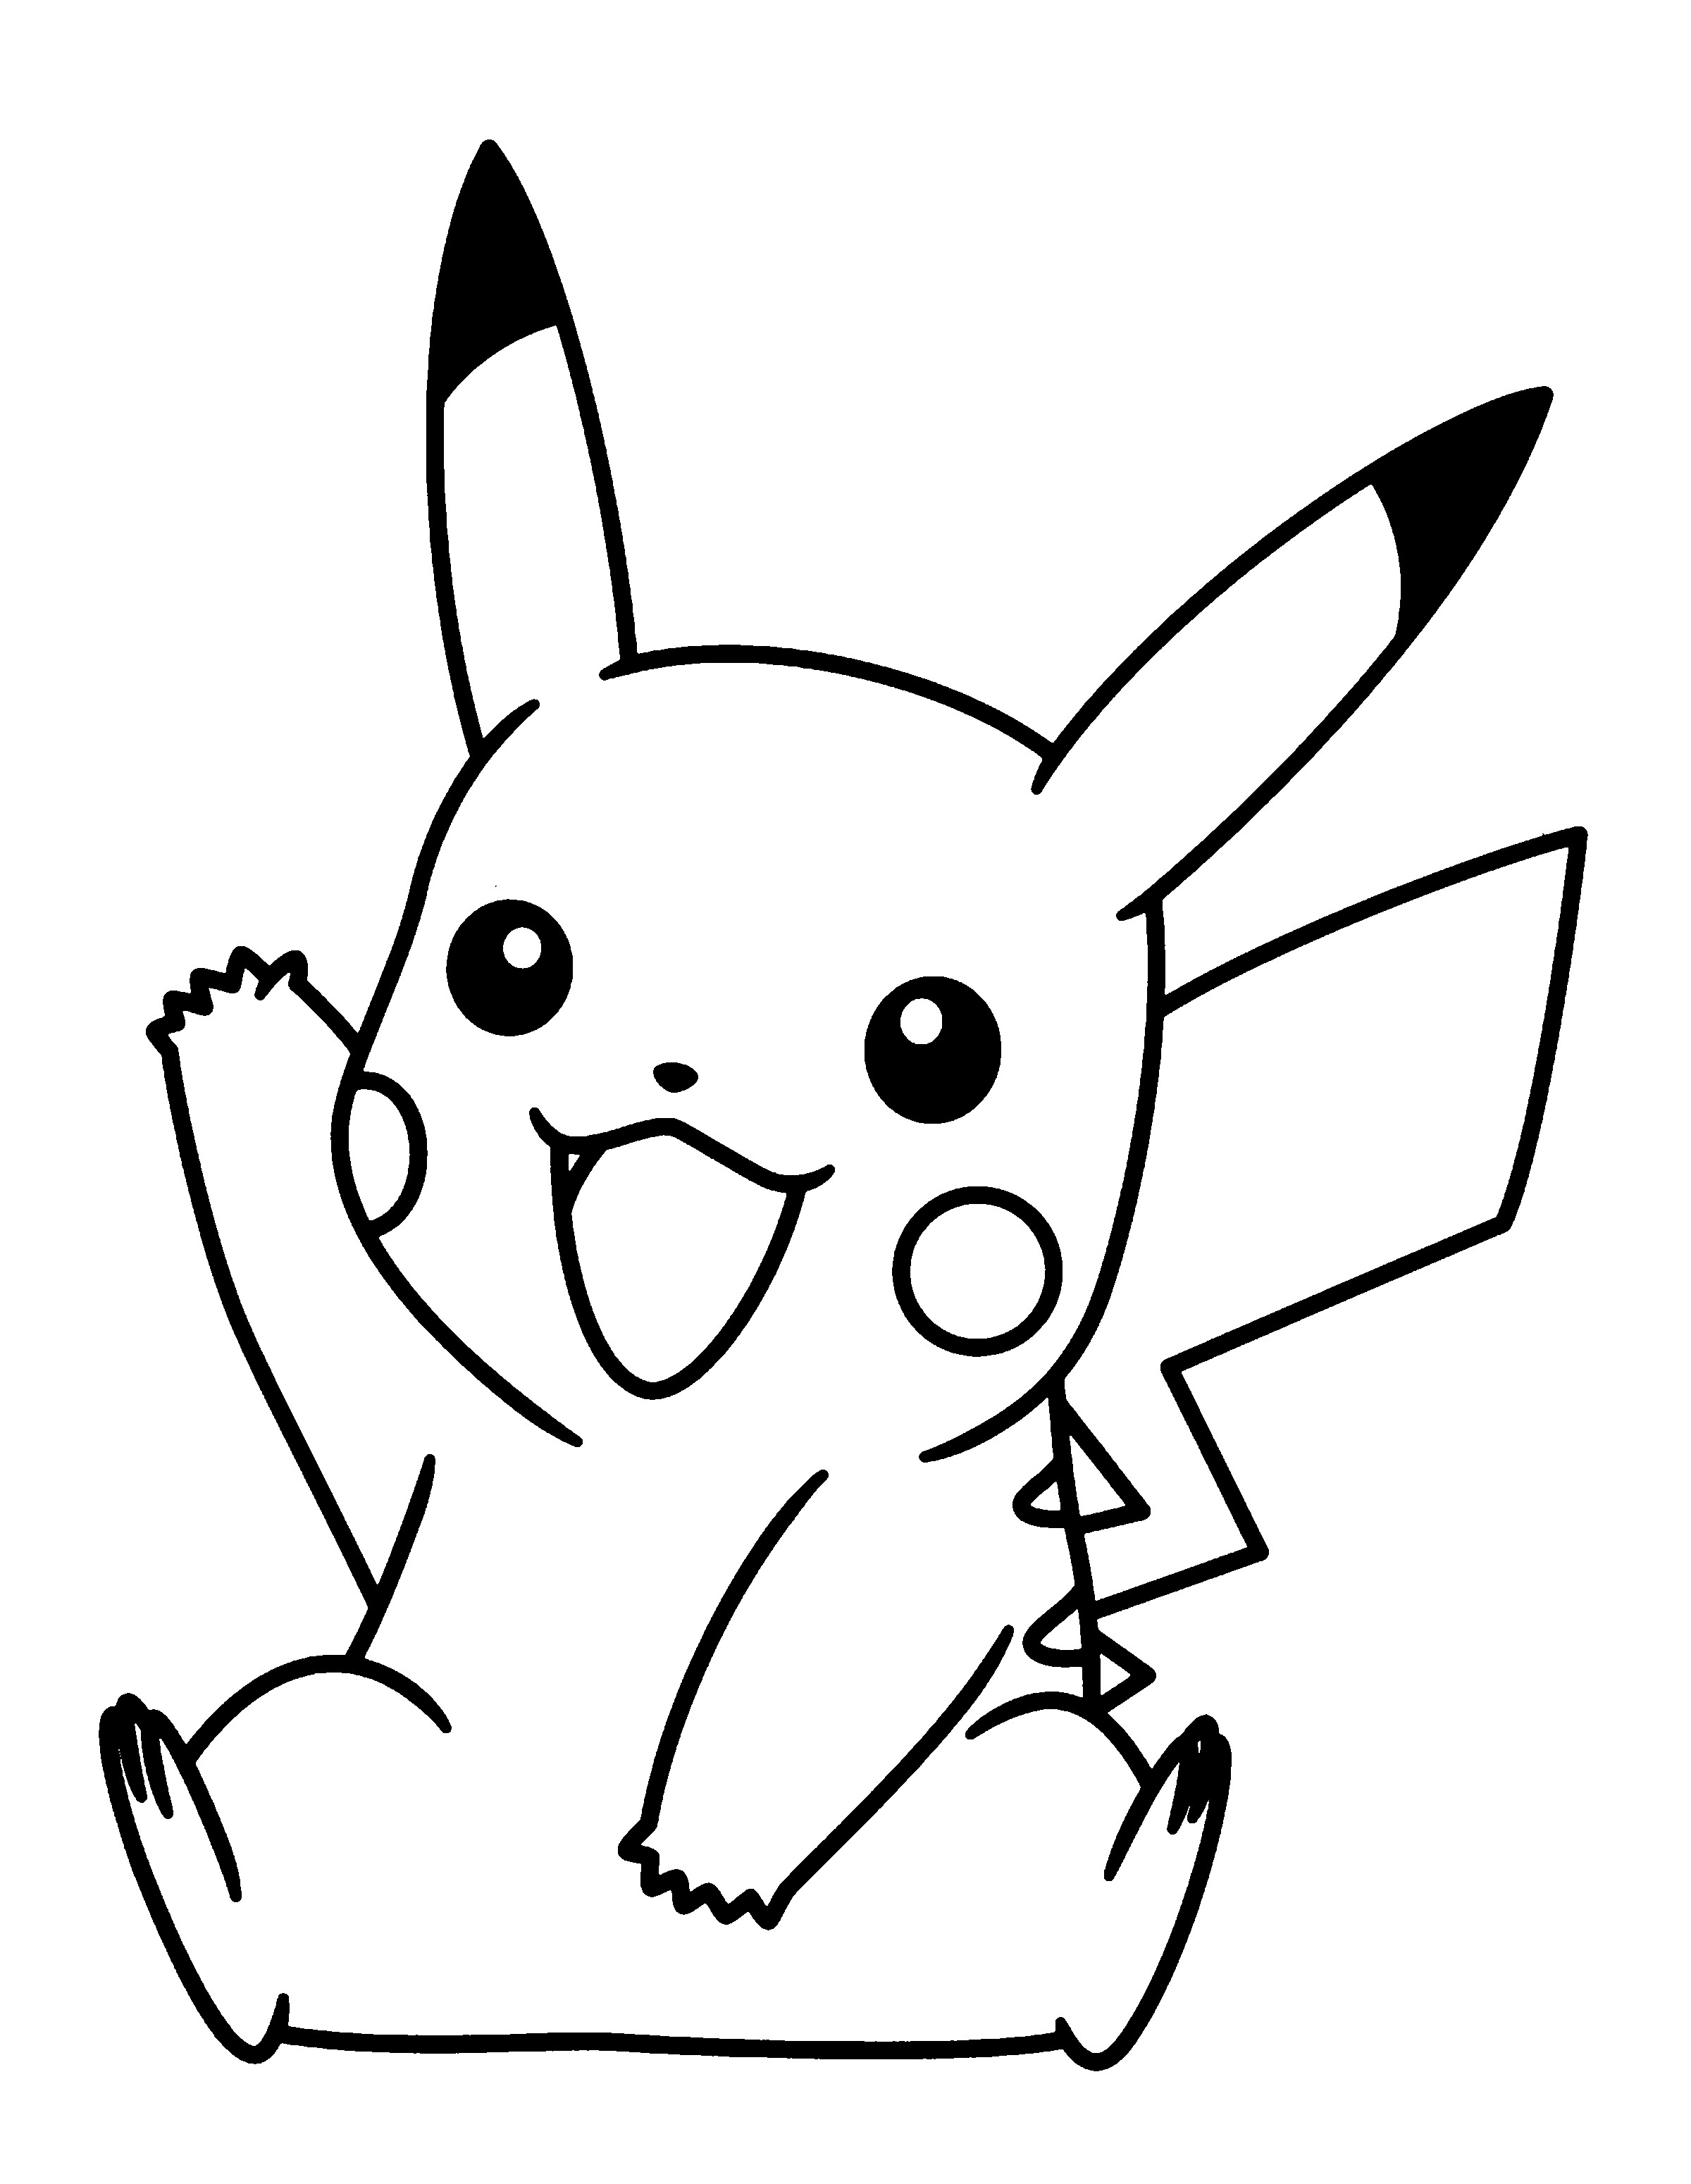 Cute Pikachu Coloring Pages at Free printable